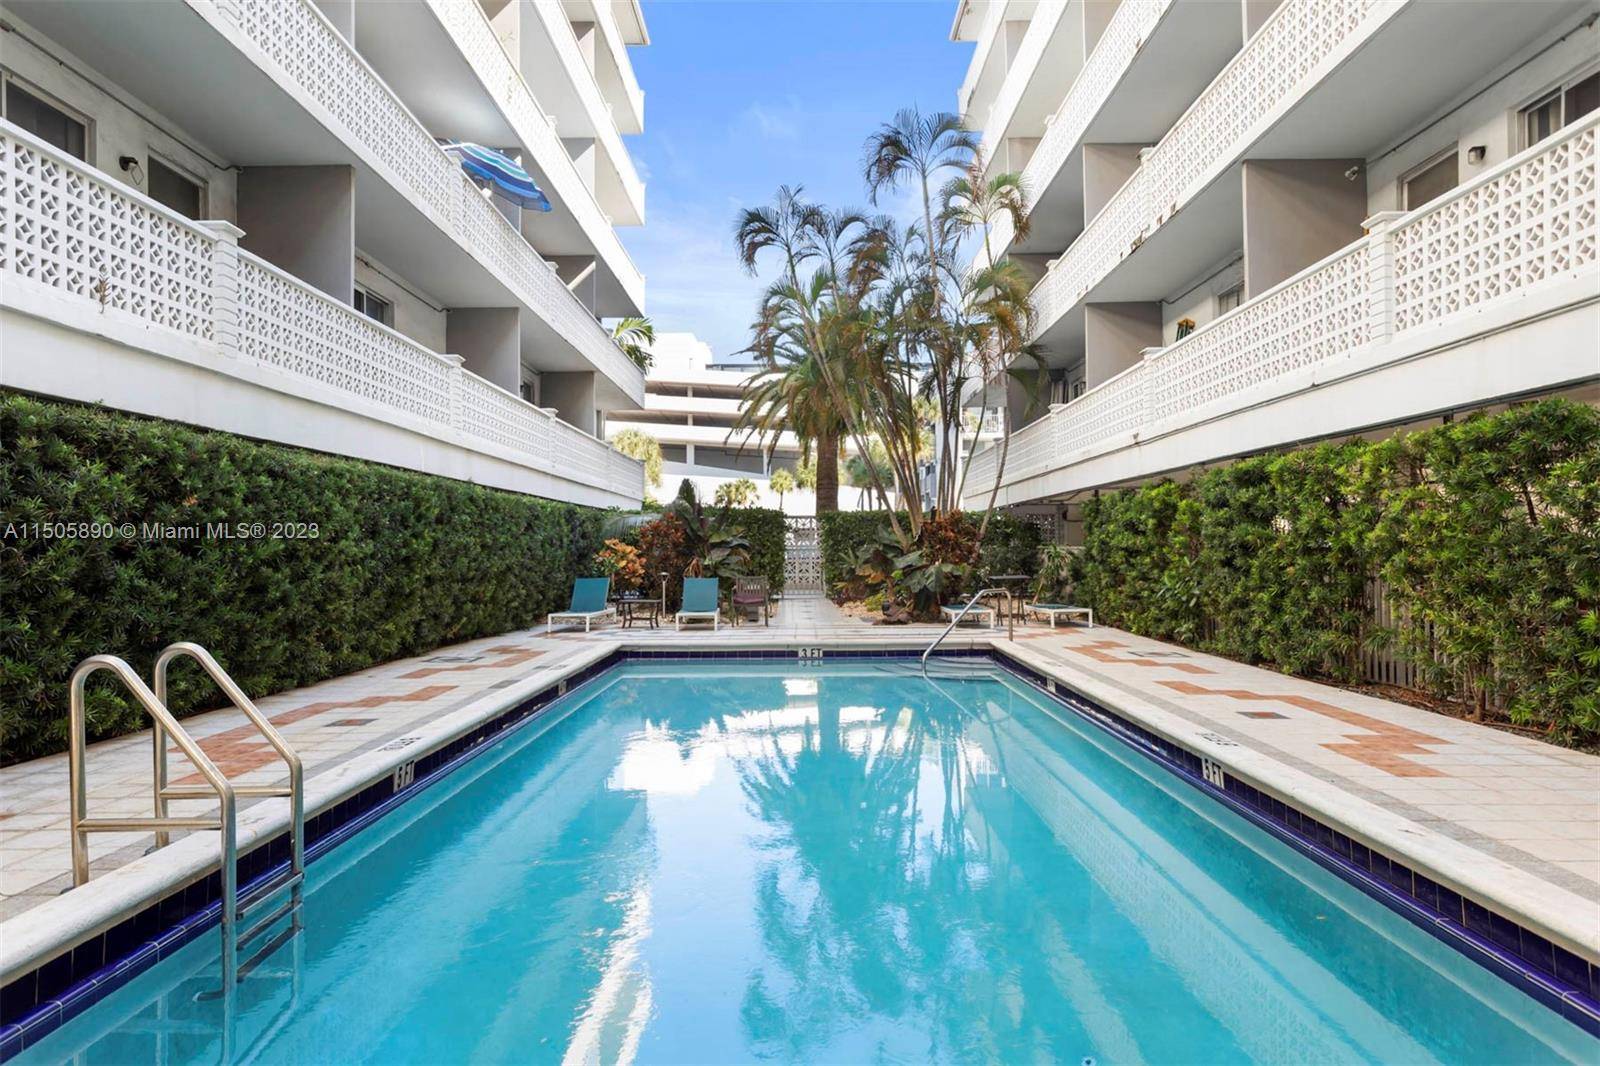 Renovated king one bedroom apartment, great layout, balcony, parking spot, and pool !